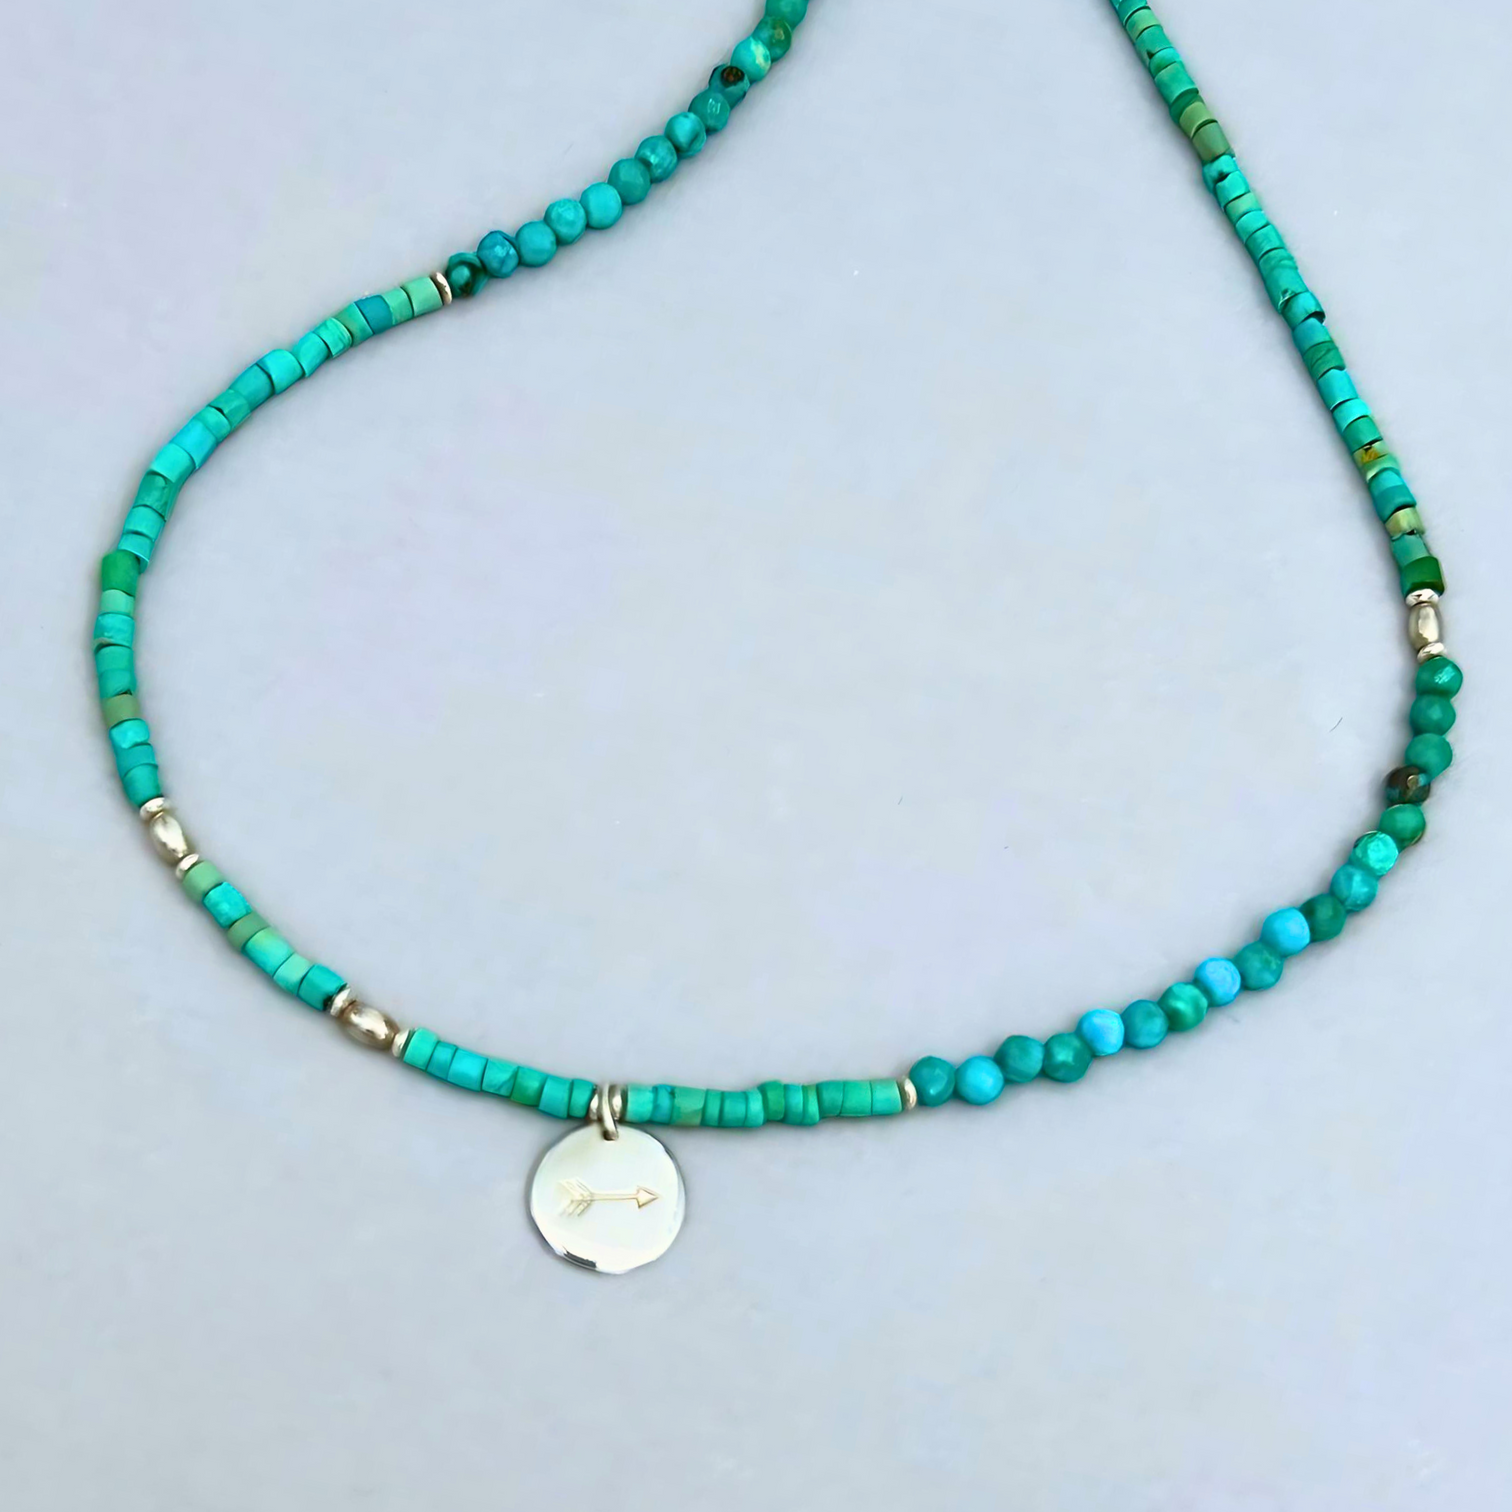 Free Spirit Necklace from Le BijouBIjou made with turquoise rondelles and a silver charm with an arrow. Close-up picture.